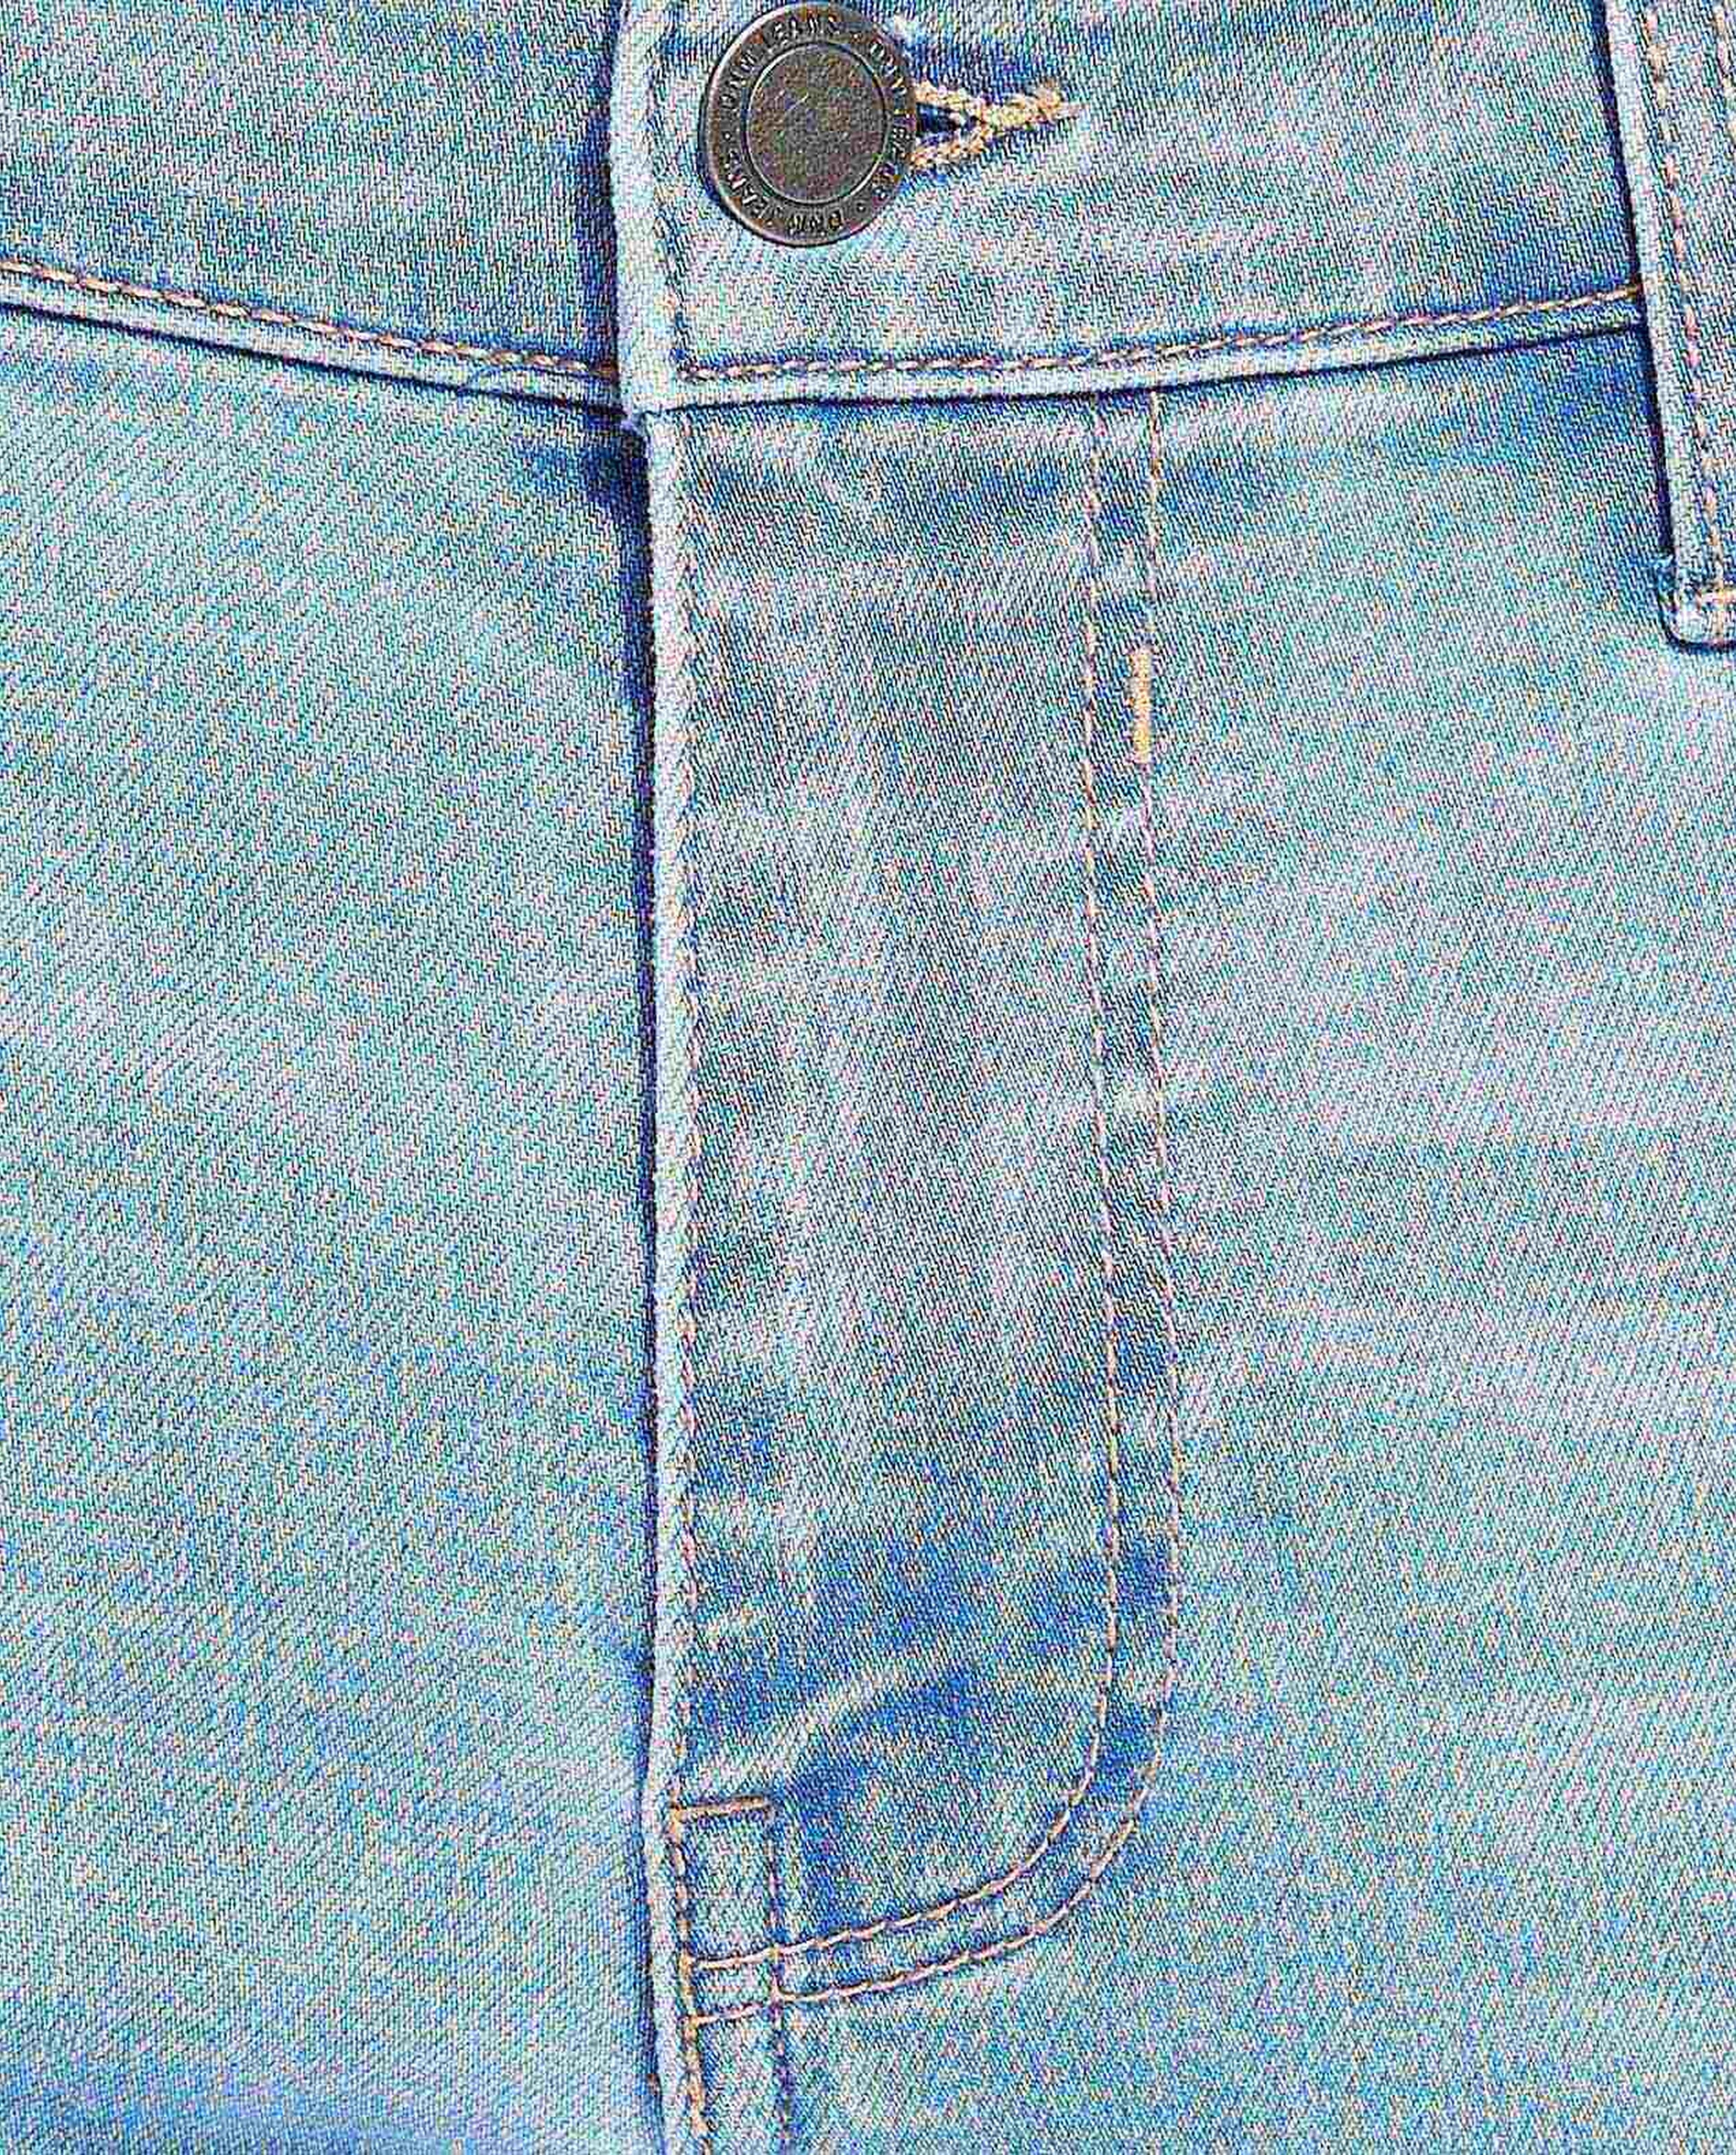 Faded Slim Fit Jeans